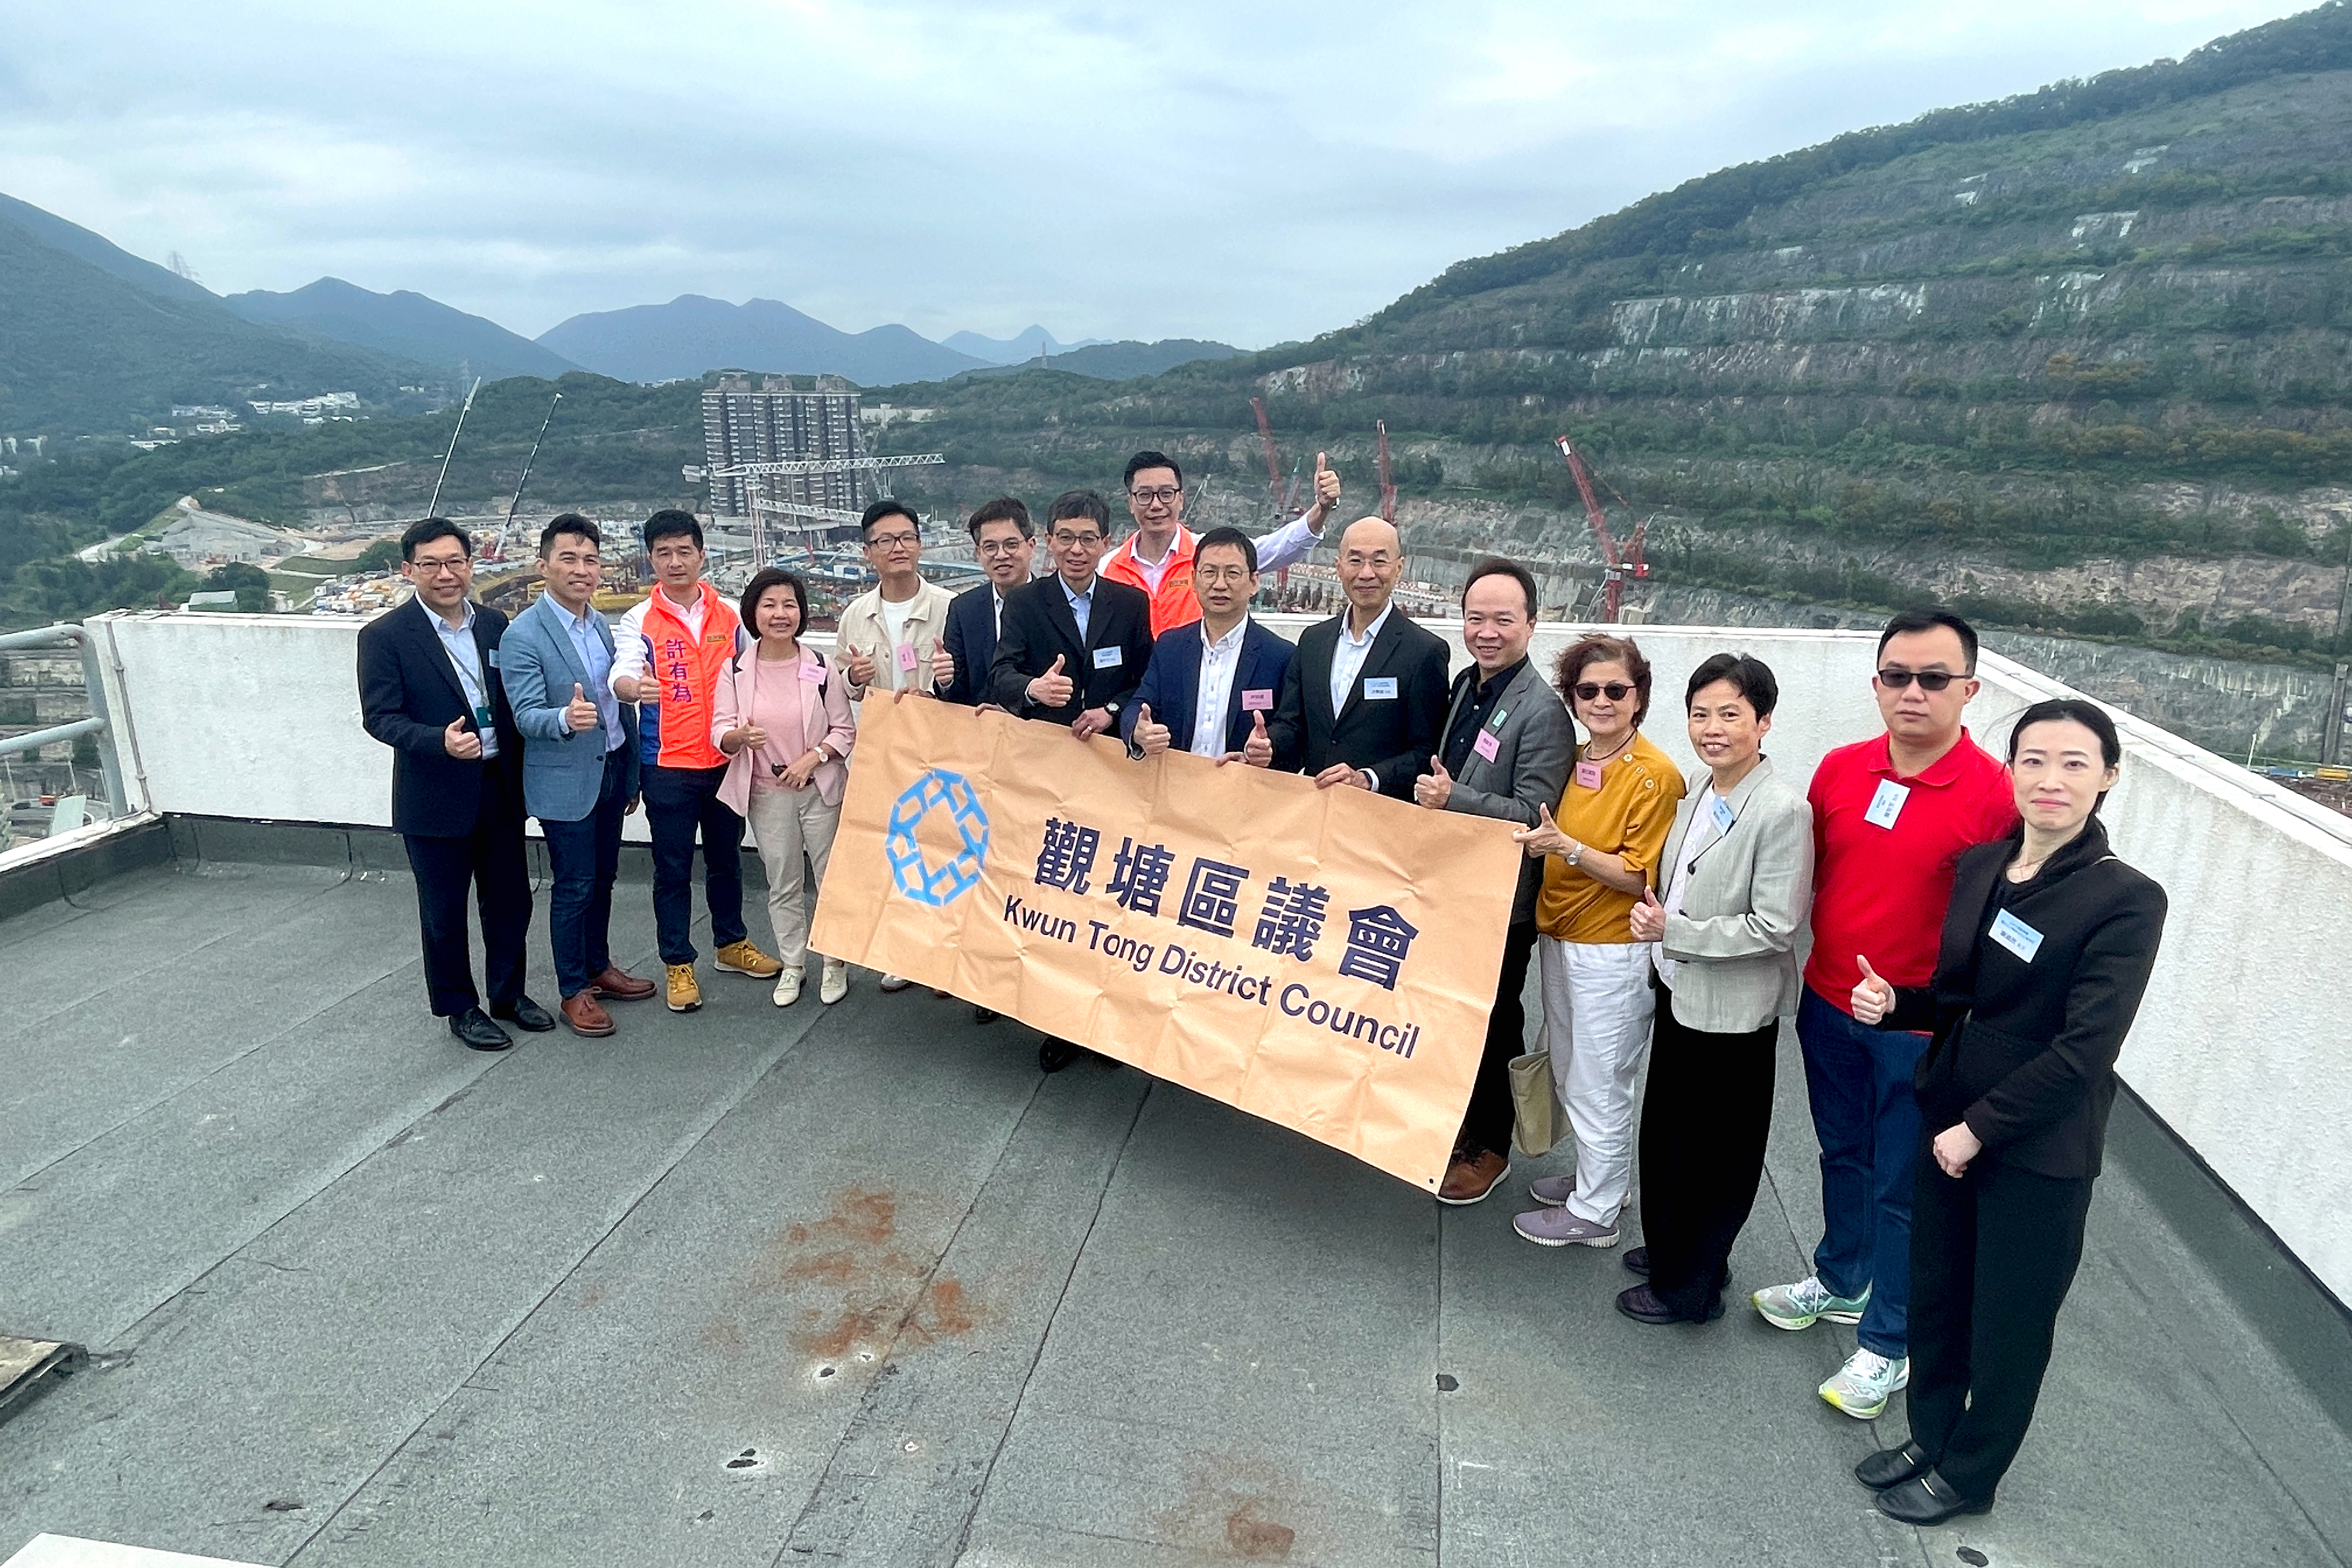 Mr. FONG Hok Shing, Michael, Director of the Civil Engineering and Development Department, and Mr. LEUNG Chung Lap, Michael, Project Manger (East) of CEDD, updated the Kwun Tong District Council members on the latest developments of the Anderson Road Quarry Site.